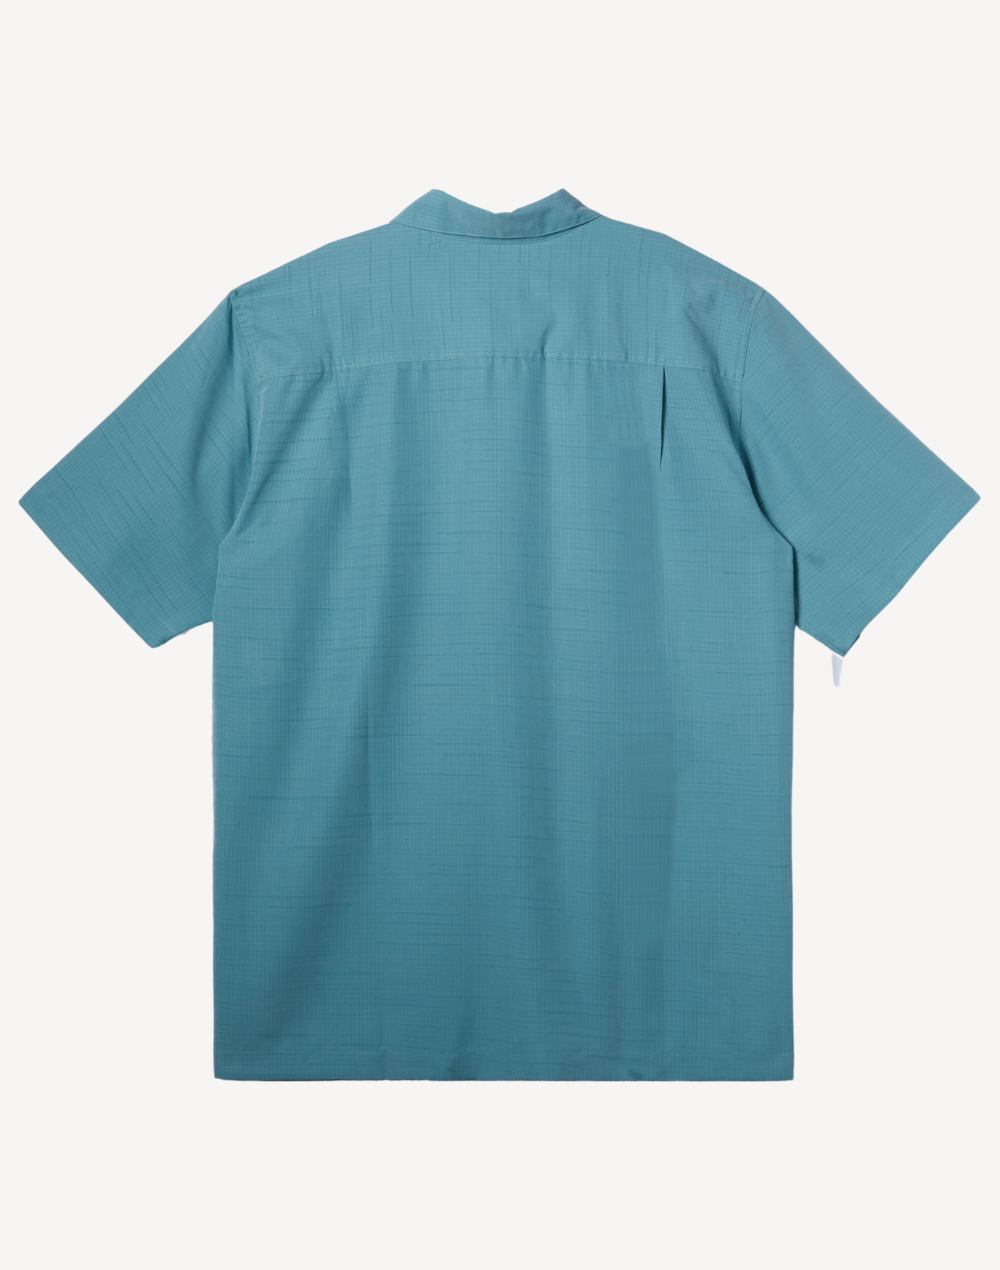 Centinela 4 Short Sleeve Shirt#color_reef-waters-teal